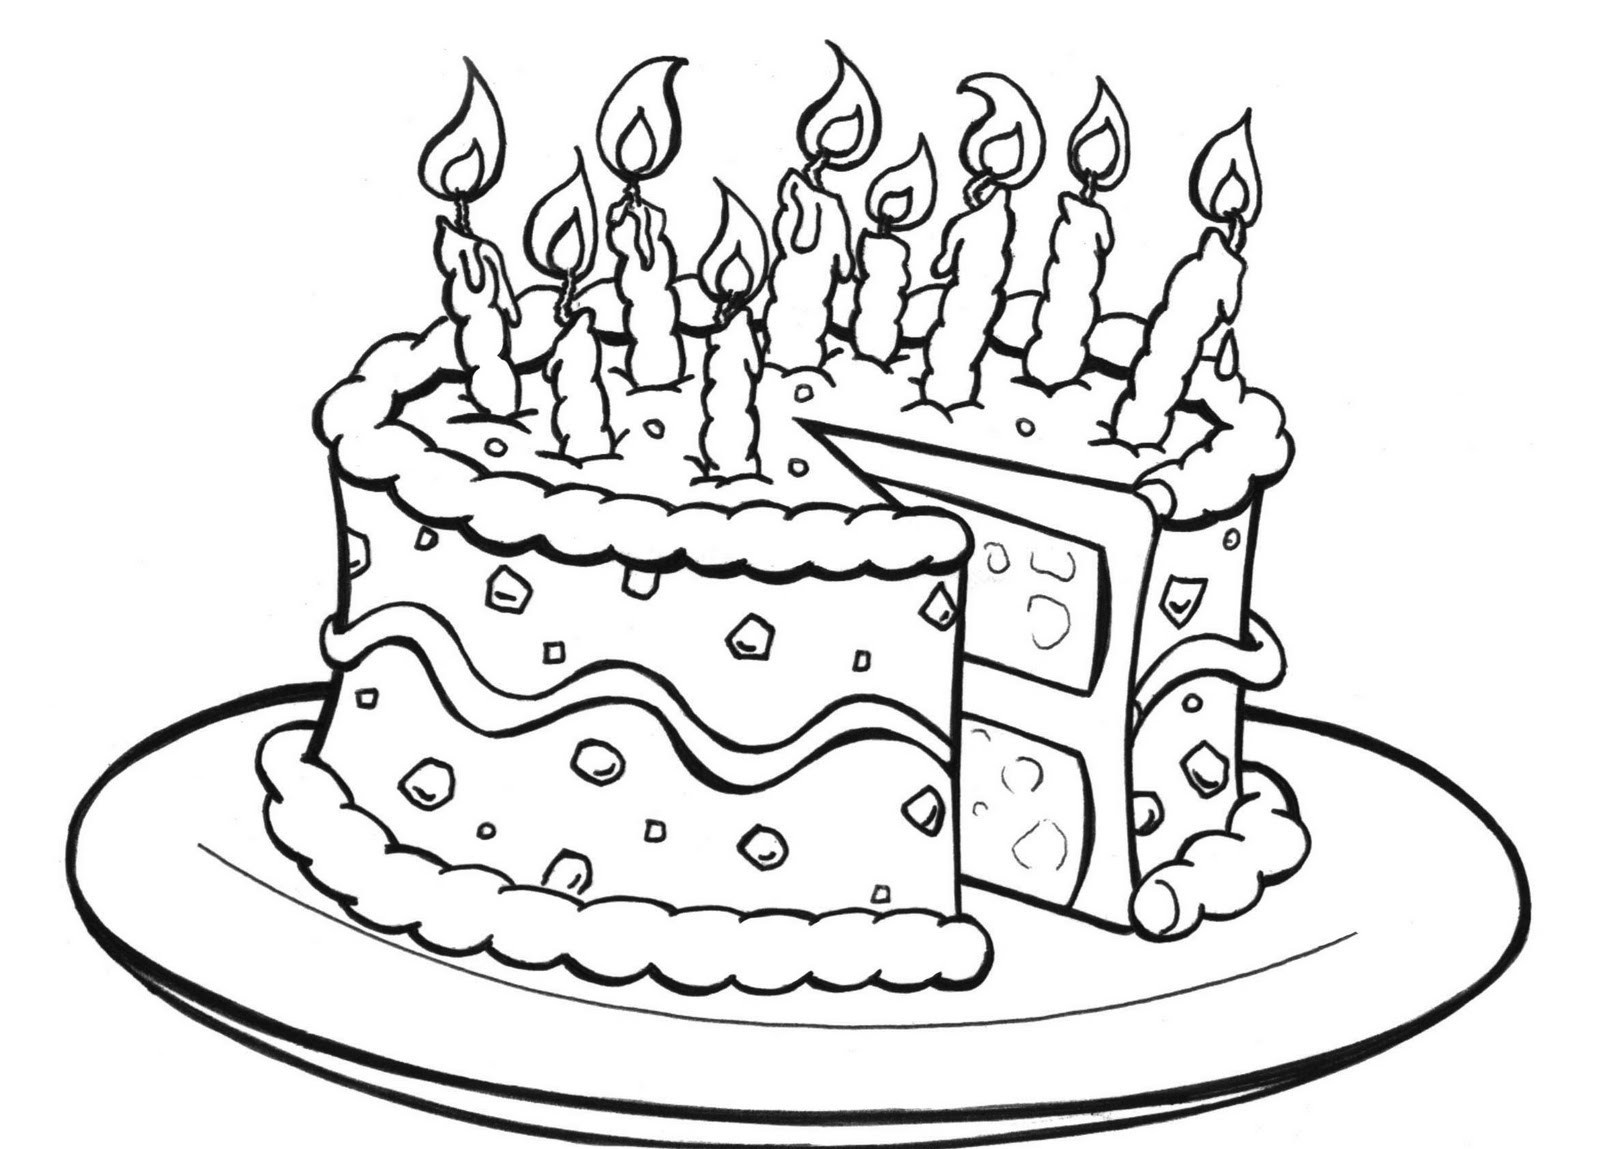 Free Printable Birthday Cake Coloring Pages For Kids - Free Printable Pictures Of Birthday Cakes